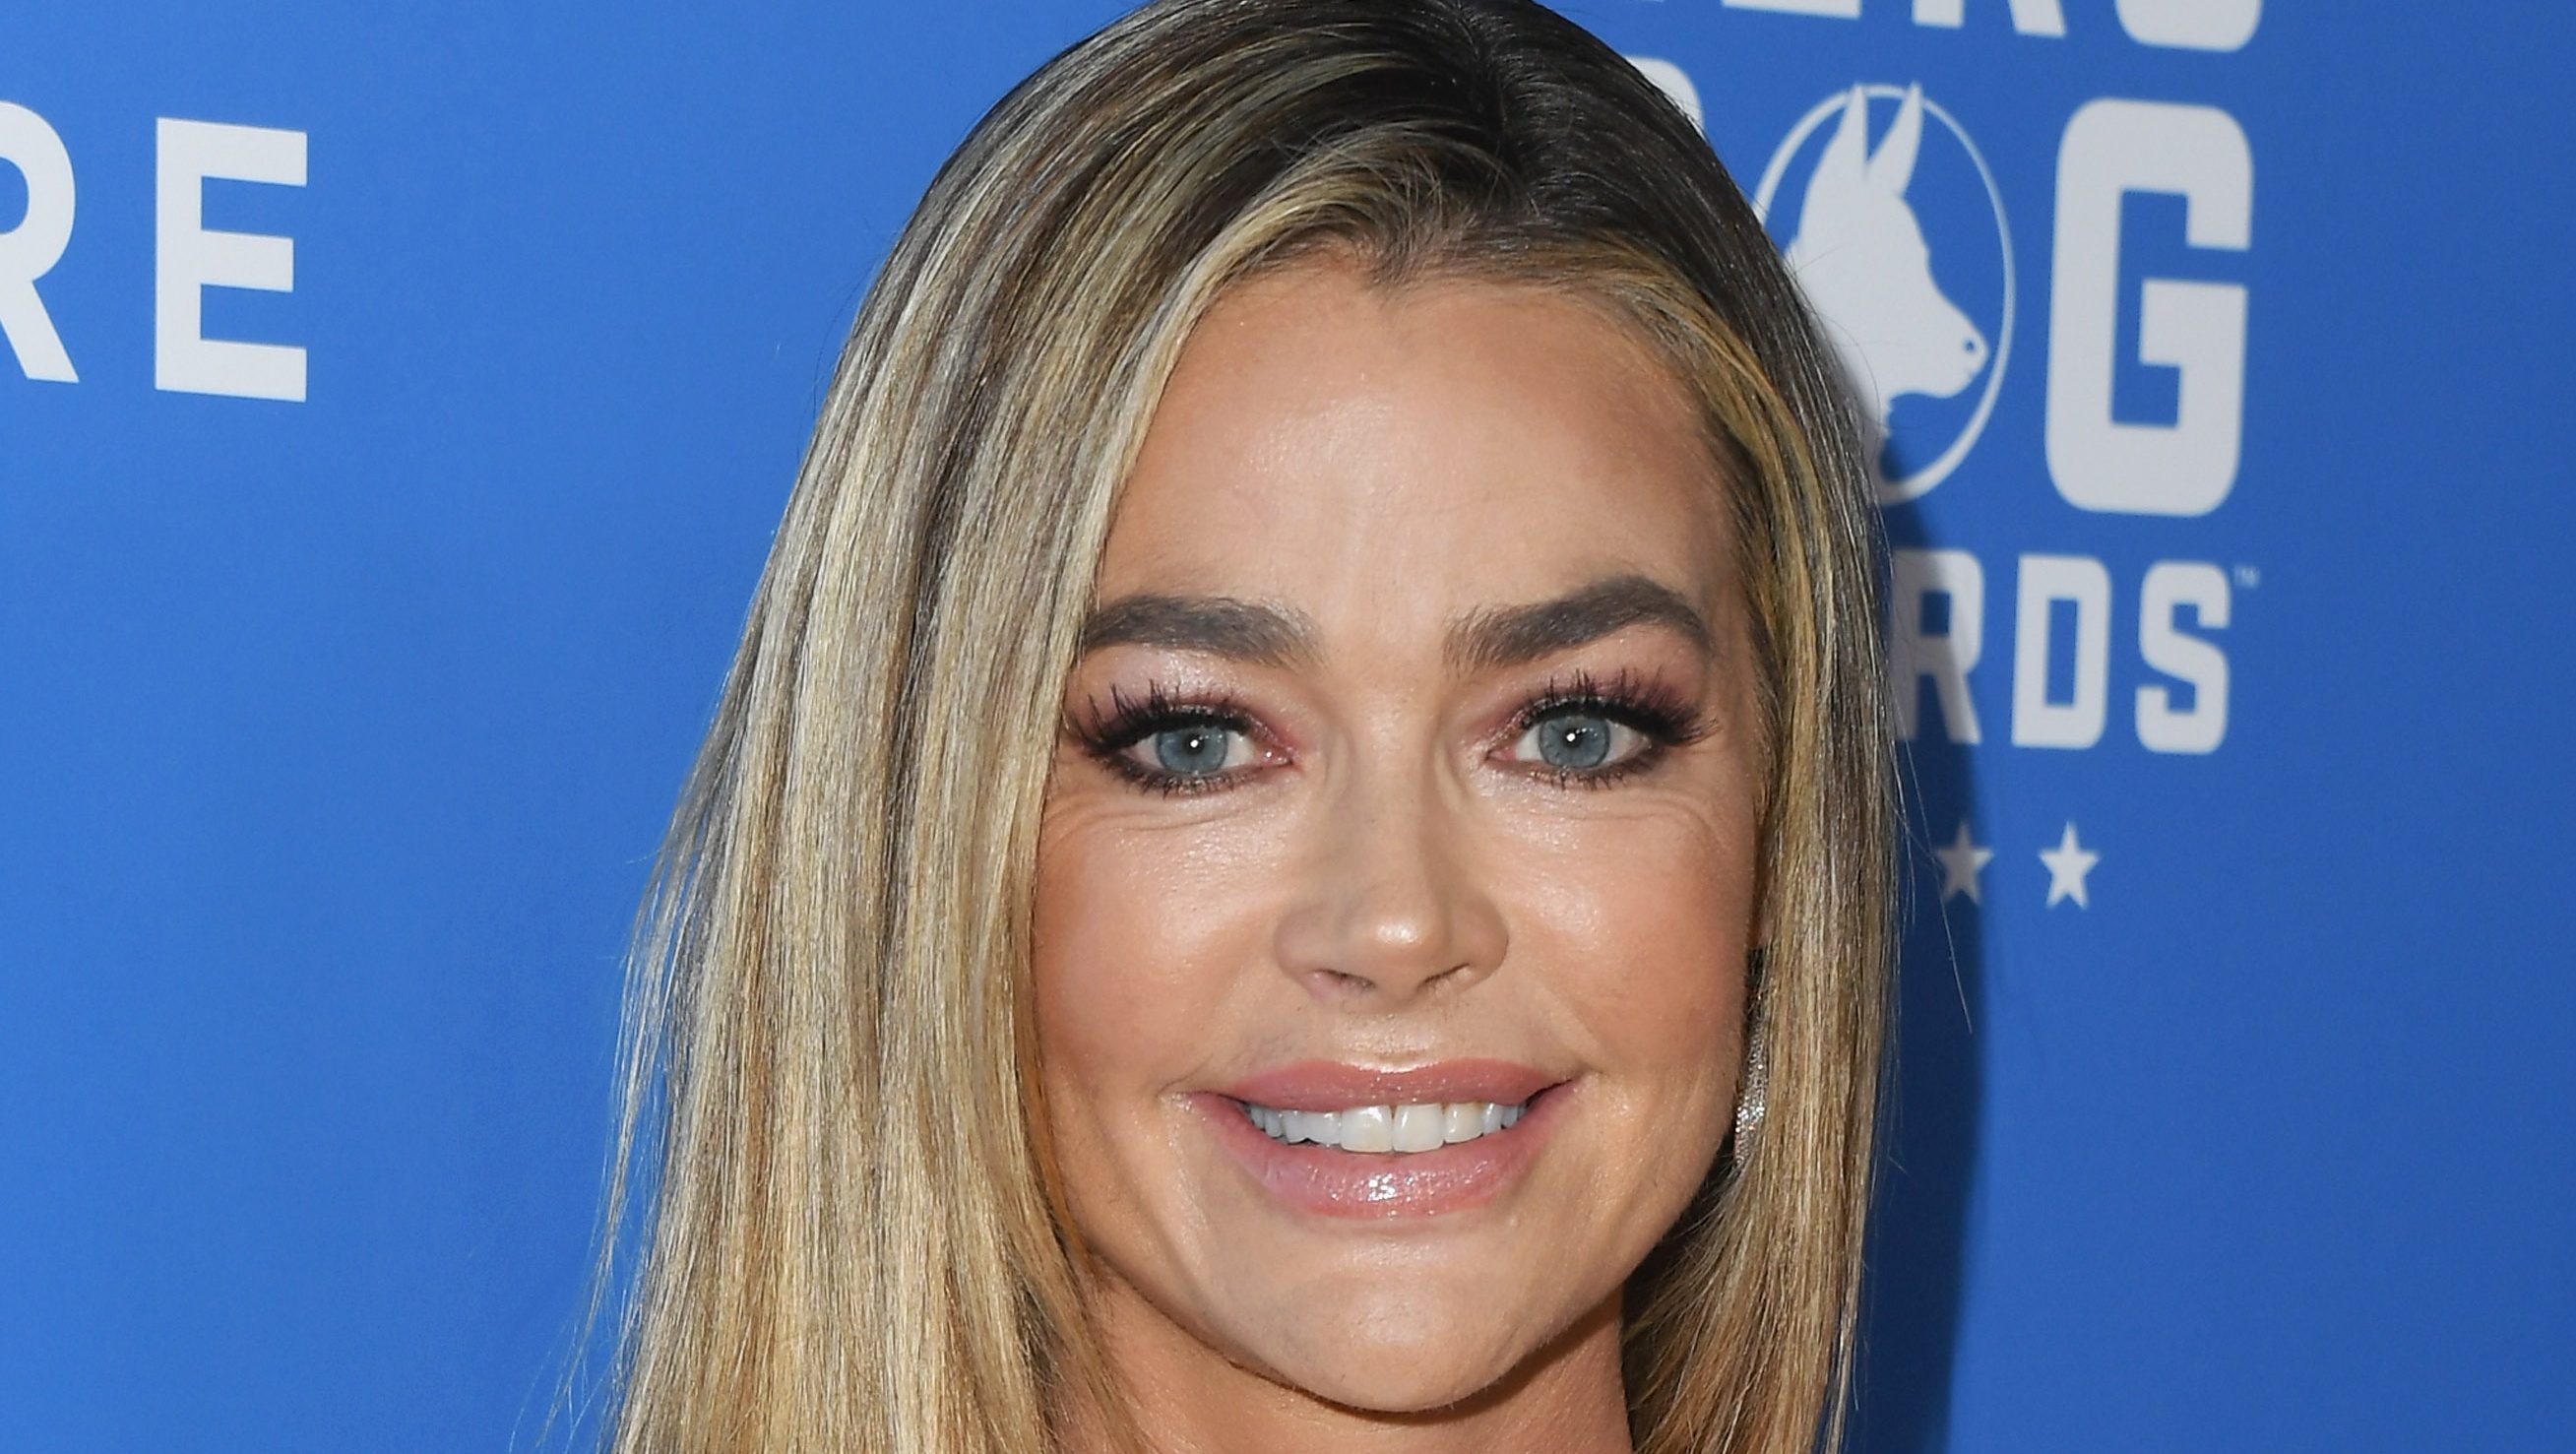 Denise Richards’ RHOBH Drama Is She Still on ‘Real Housewives of